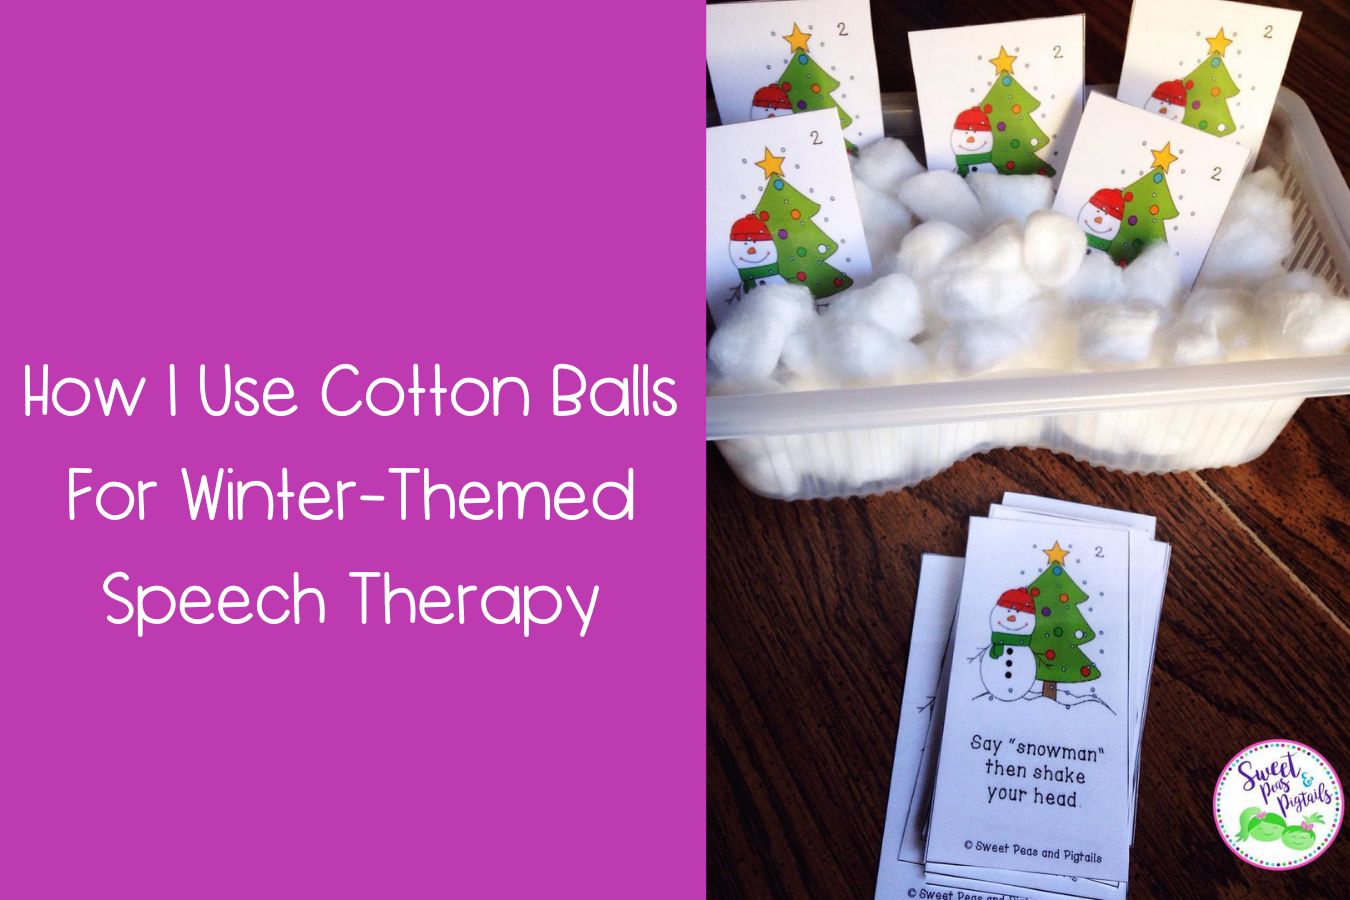 How I Use Cotton Balls For Winter-Themed Speech Therapy Featured